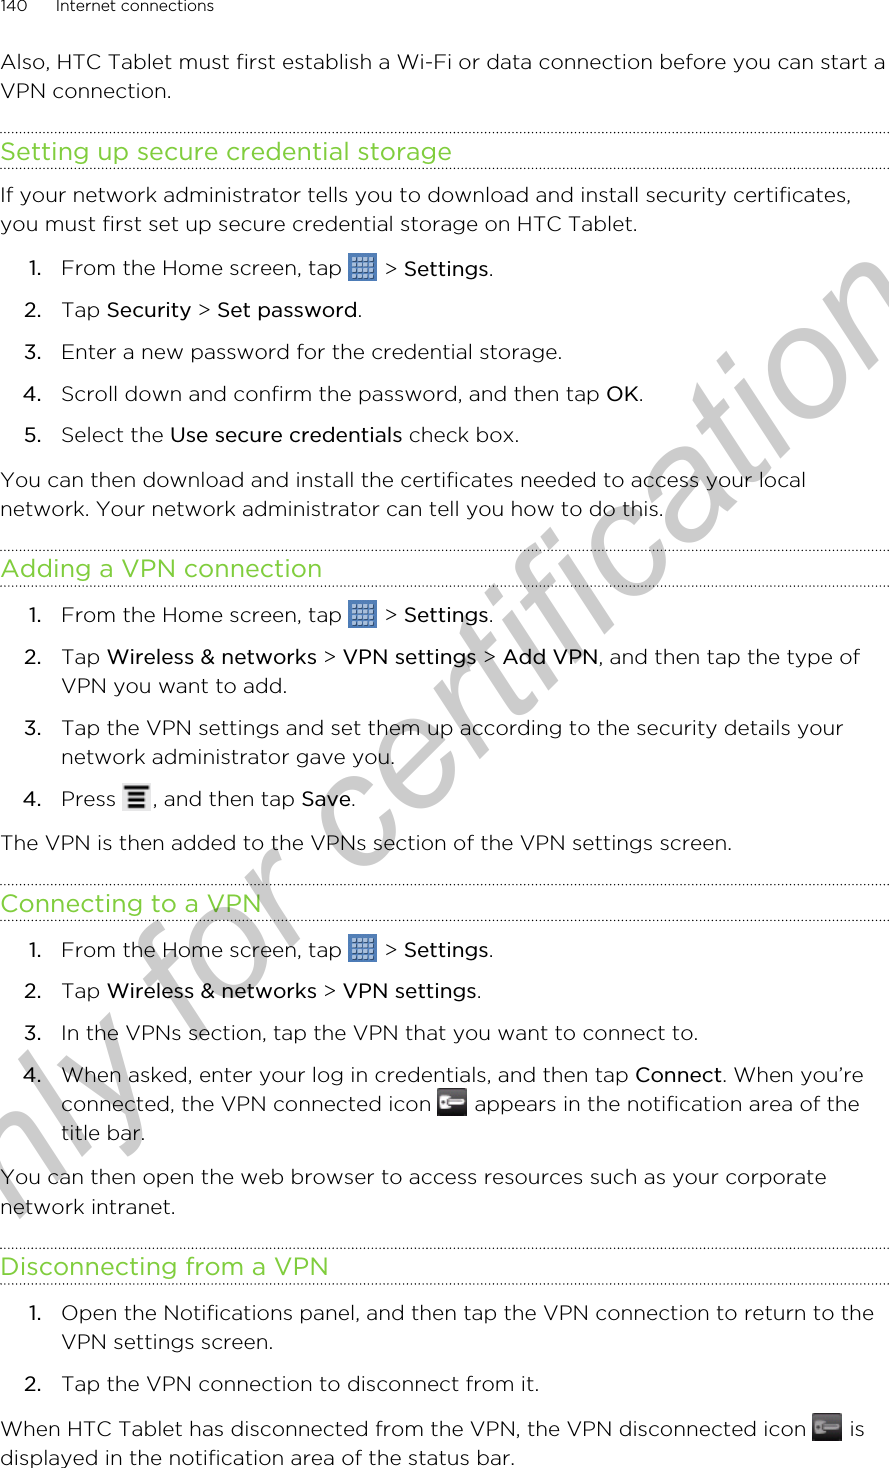 Also, HTC Tablet must first establish a Wi-Fi or data connection before you can start aVPN connection.Setting up secure credential storageIf your network administrator tells you to download and install security certificates,you must first set up secure credential storage on HTC Tablet.1. From the Home screen, tap   &gt; Settings.2. Tap Security &gt; Set password.3. Enter a new password for the credential storage.4. Scroll down and confirm the password, and then tap OK.5. Select the Use secure credentials check box.You can then download and install the certificates needed to access your localnetwork. Your network administrator can tell you how to do this.Adding a VPN connection1. From the Home screen, tap   &gt; Settings.2. Tap Wireless &amp; networks &gt; VPN settings &gt; Add VPN, and then tap the type ofVPN you want to add.3. Tap the VPN settings and set them up according to the security details yournetwork administrator gave you.4. Press  , and then tap Save.The VPN is then added to the VPNs section of the VPN settings screen.Connecting to a VPN1. From the Home screen, tap   &gt; Settings.2. Tap Wireless &amp; networks &gt; VPN settings.3. In the VPNs section, tap the VPN that you want to connect to.4. When asked, enter your log in credentials, and then tap Connect. When you’reconnected, the VPN connected icon   appears in the notification area of thetitle bar.You can then open the web browser to access resources such as your corporatenetwork intranet.Disconnecting from a VPN1. Open the Notifications panel, and then tap the VPN connection to return to theVPN settings screen.2. Tap the VPN connection to disconnect from it.When HTC Tablet has disconnected from the VPN, the VPN disconnected icon   isdisplayed in the notification area of the status bar.140 Internet connectionsOnly for certification